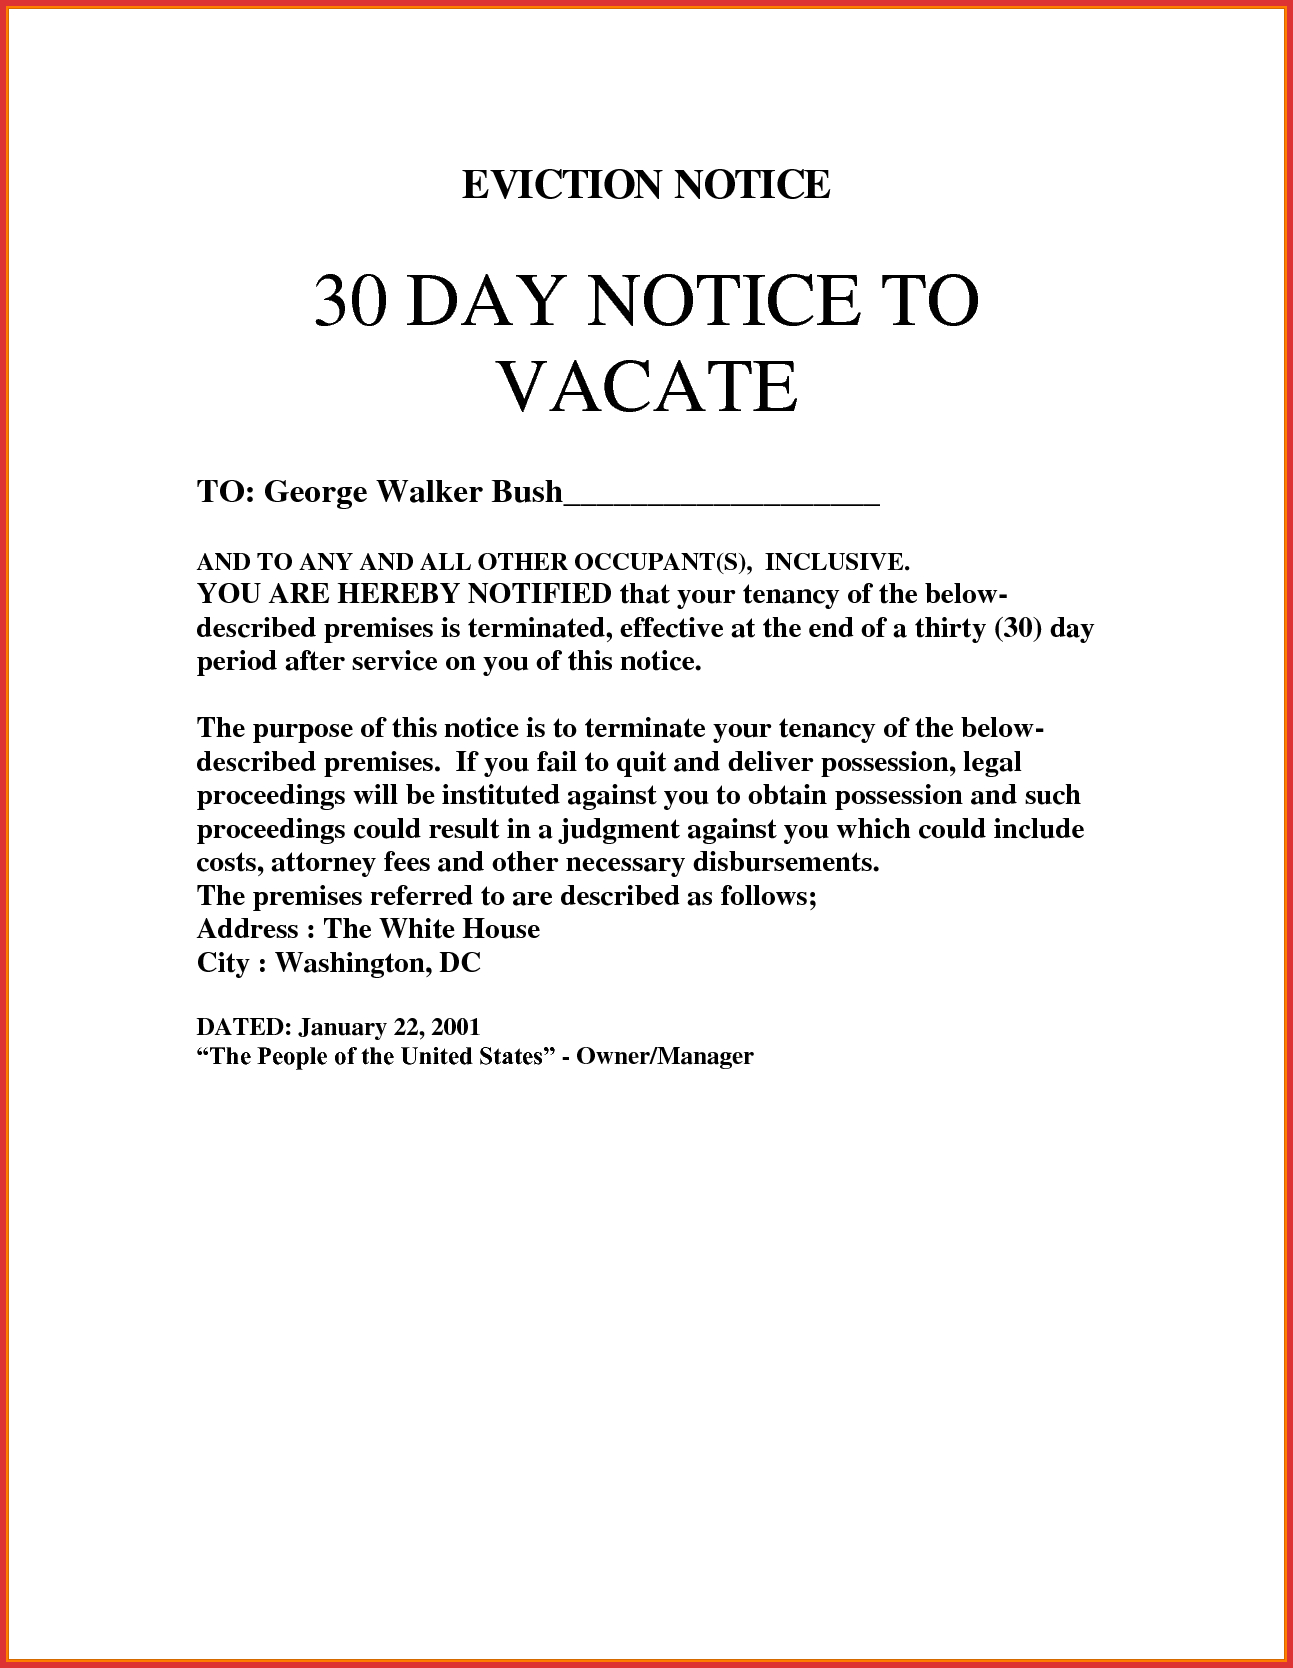 Eviction Warning Letter Template - Resignation Letter Days Notice Day to Vacate Sample Best Eviction